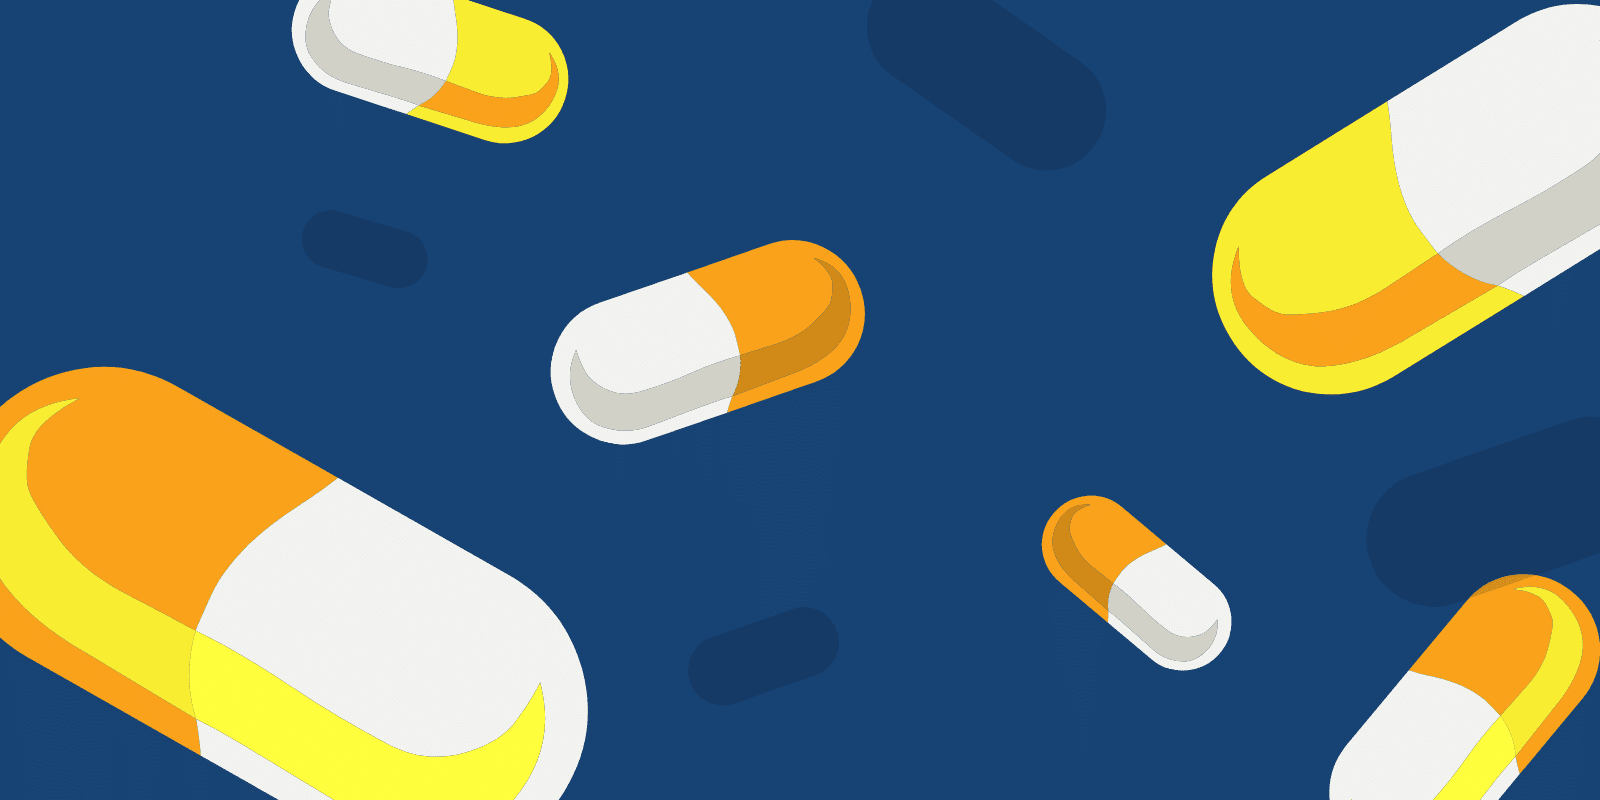 Yello and Orange capsules on a navy background with shadows